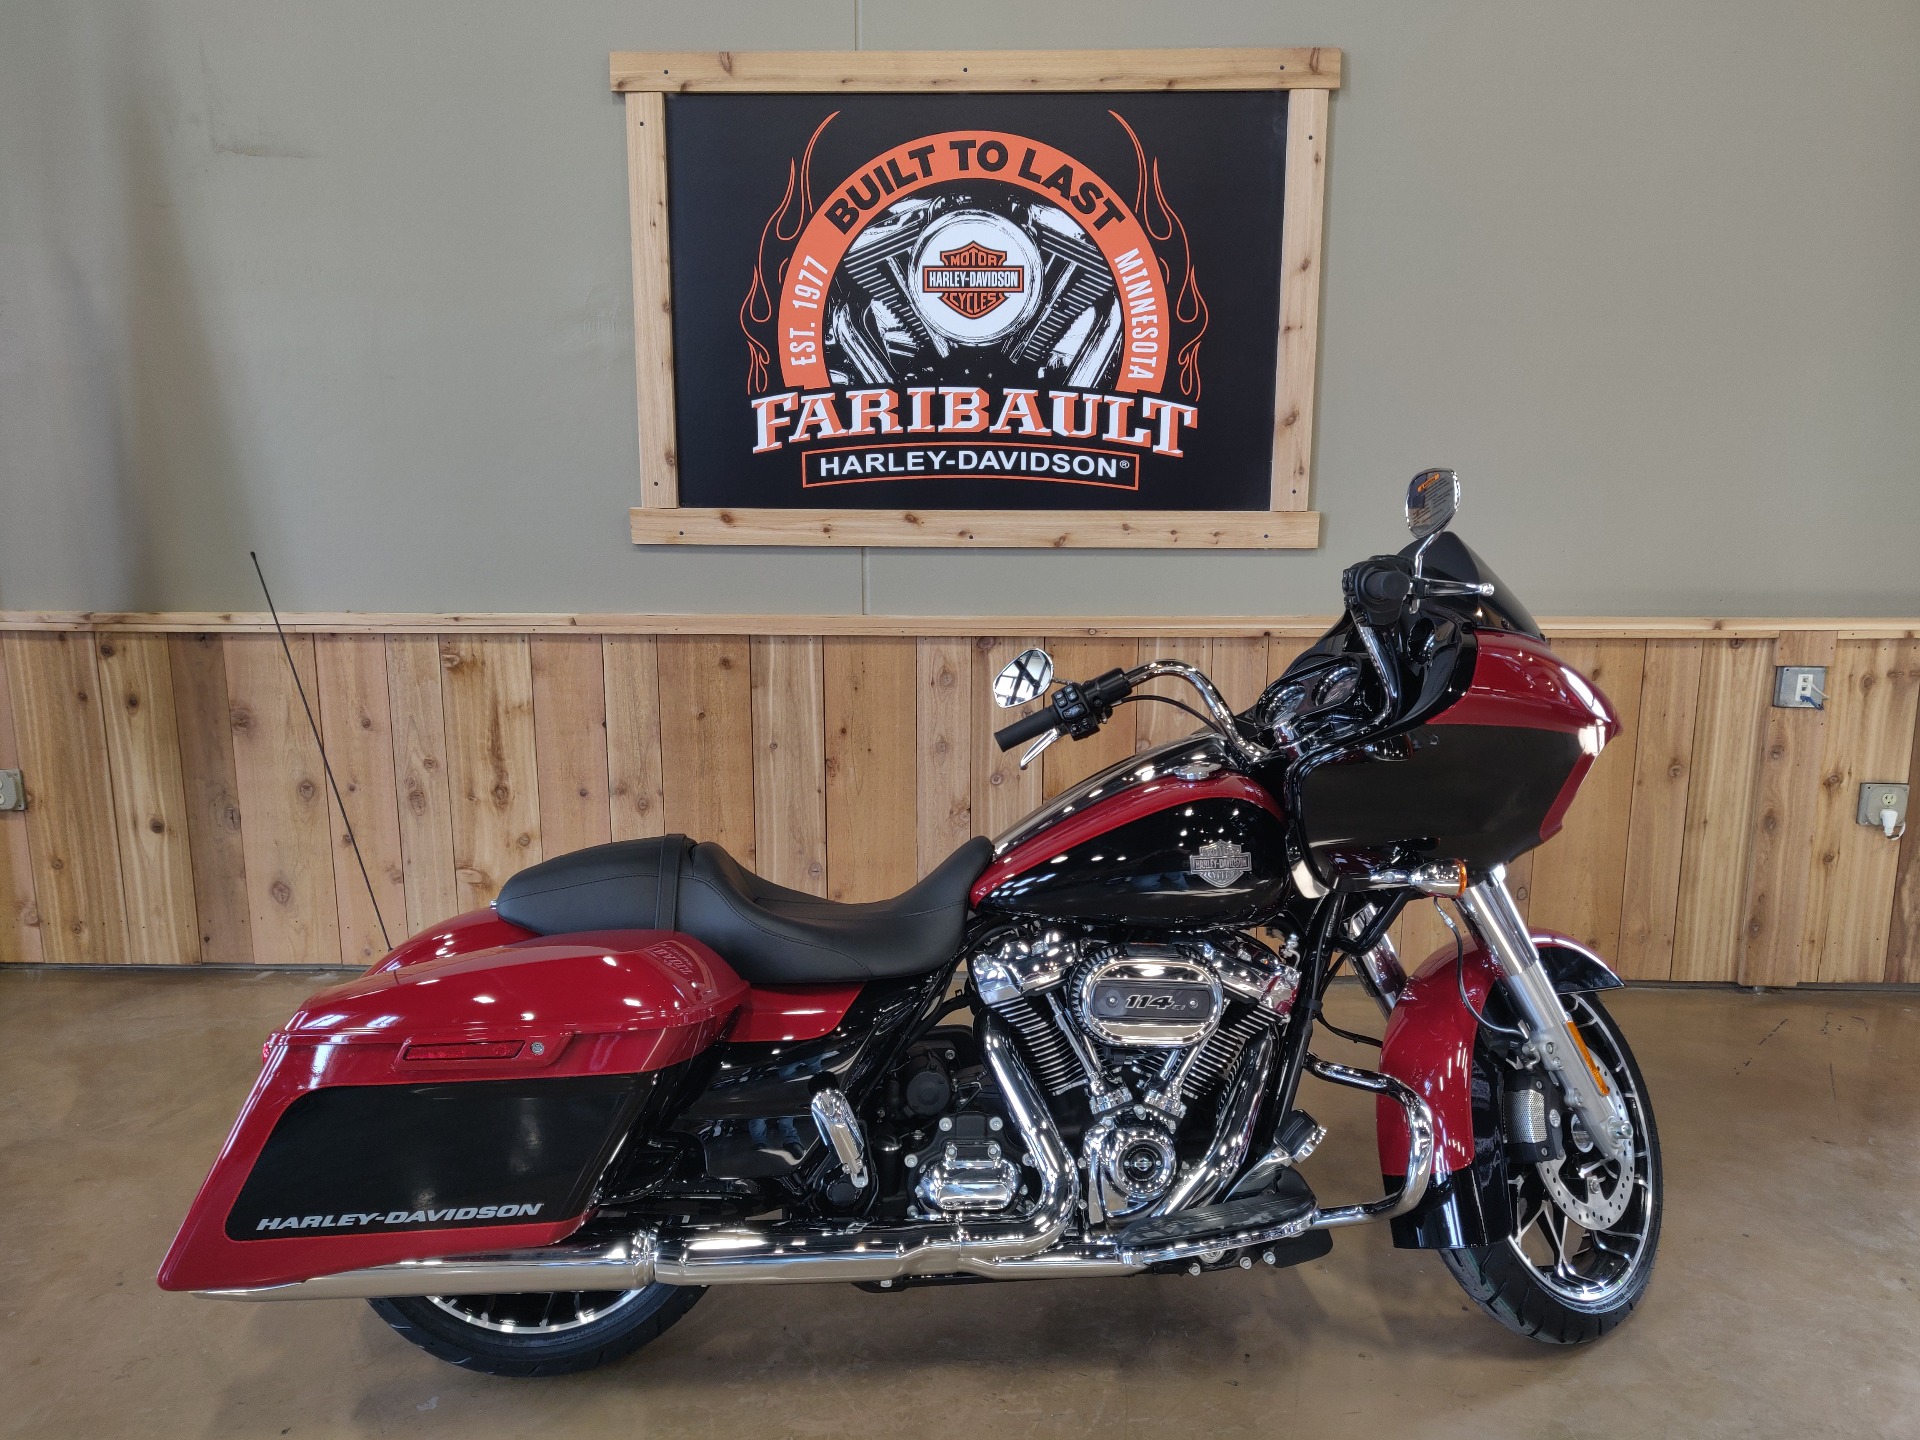 New 2021 Harley Davidson Road Glide Special Motorcycles In Faribault Mn To618553 Billiard Red Vivid Black Chrome Option